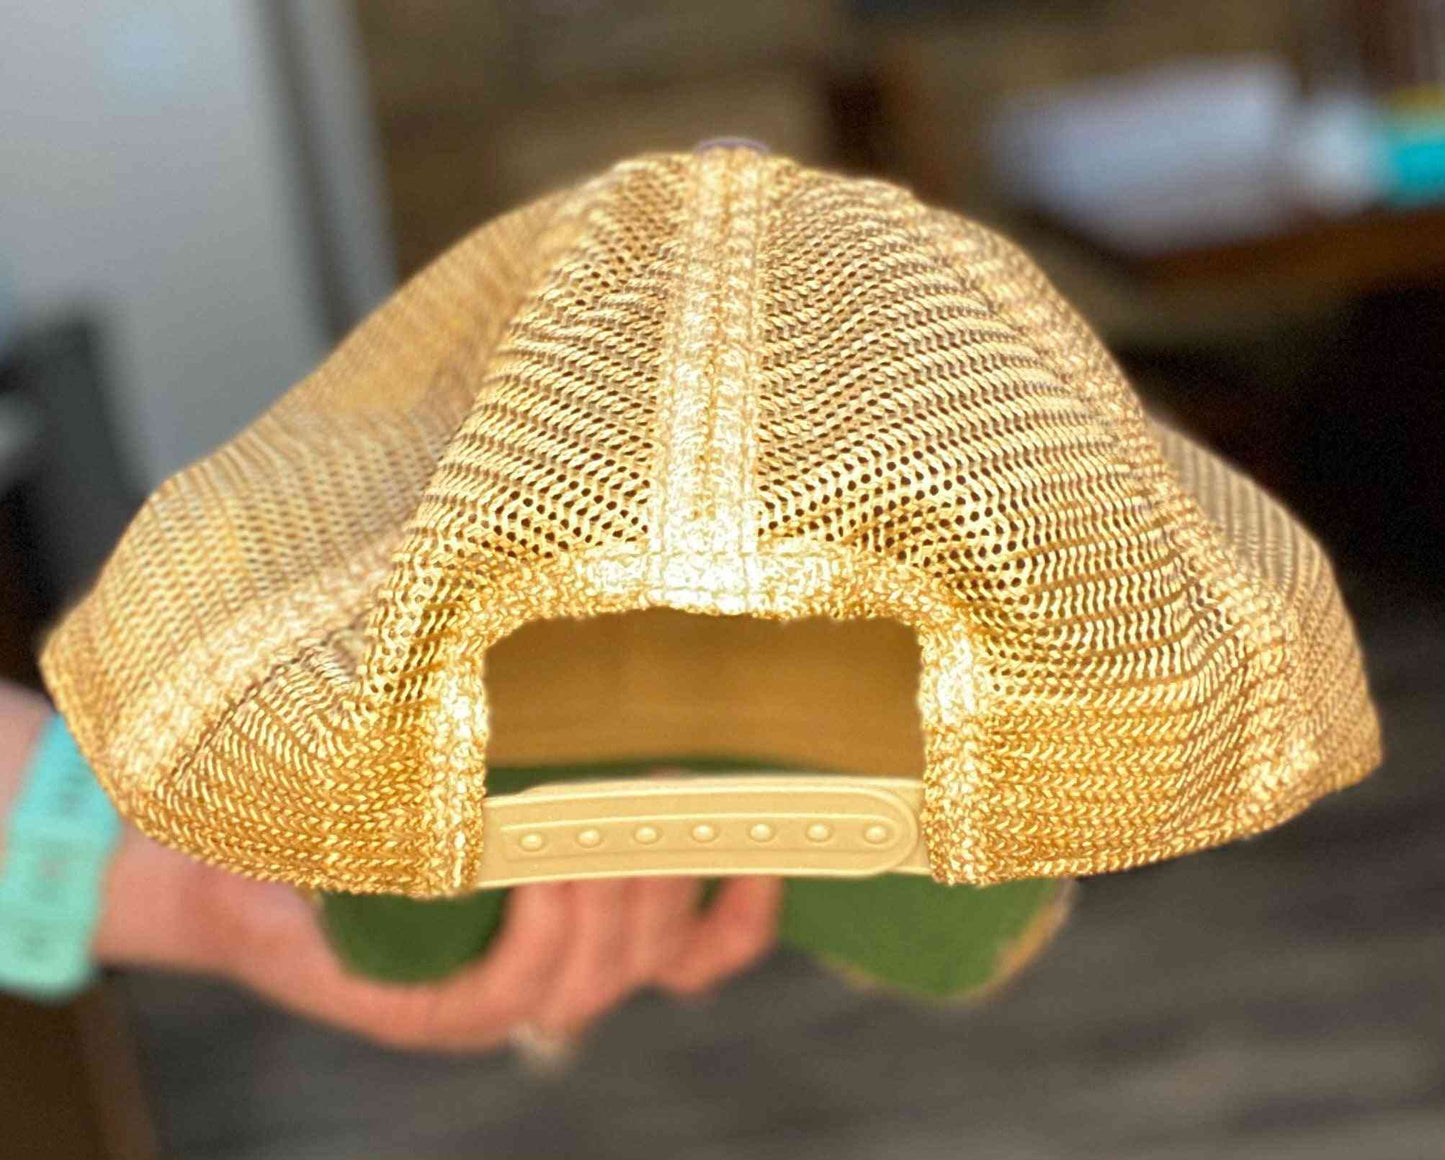 “Pool Vibes” hat - The Swanky Bee